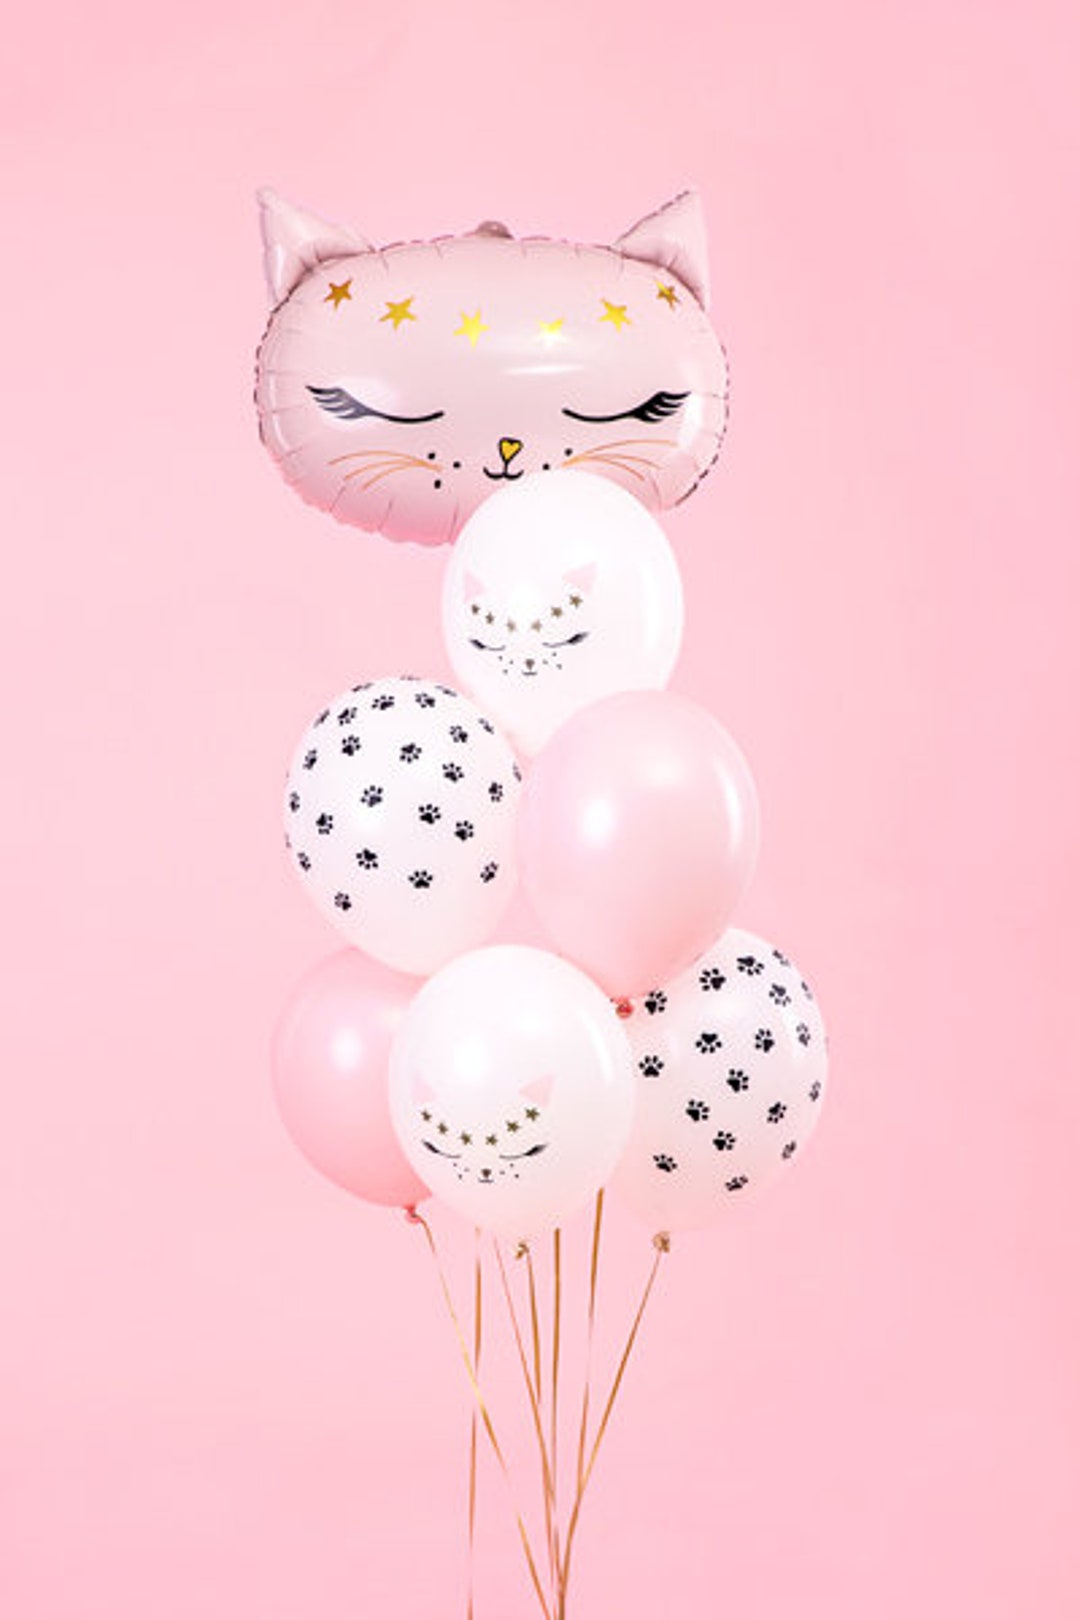 Happy Birthday Banner Pastel Colors – Pink the Cat